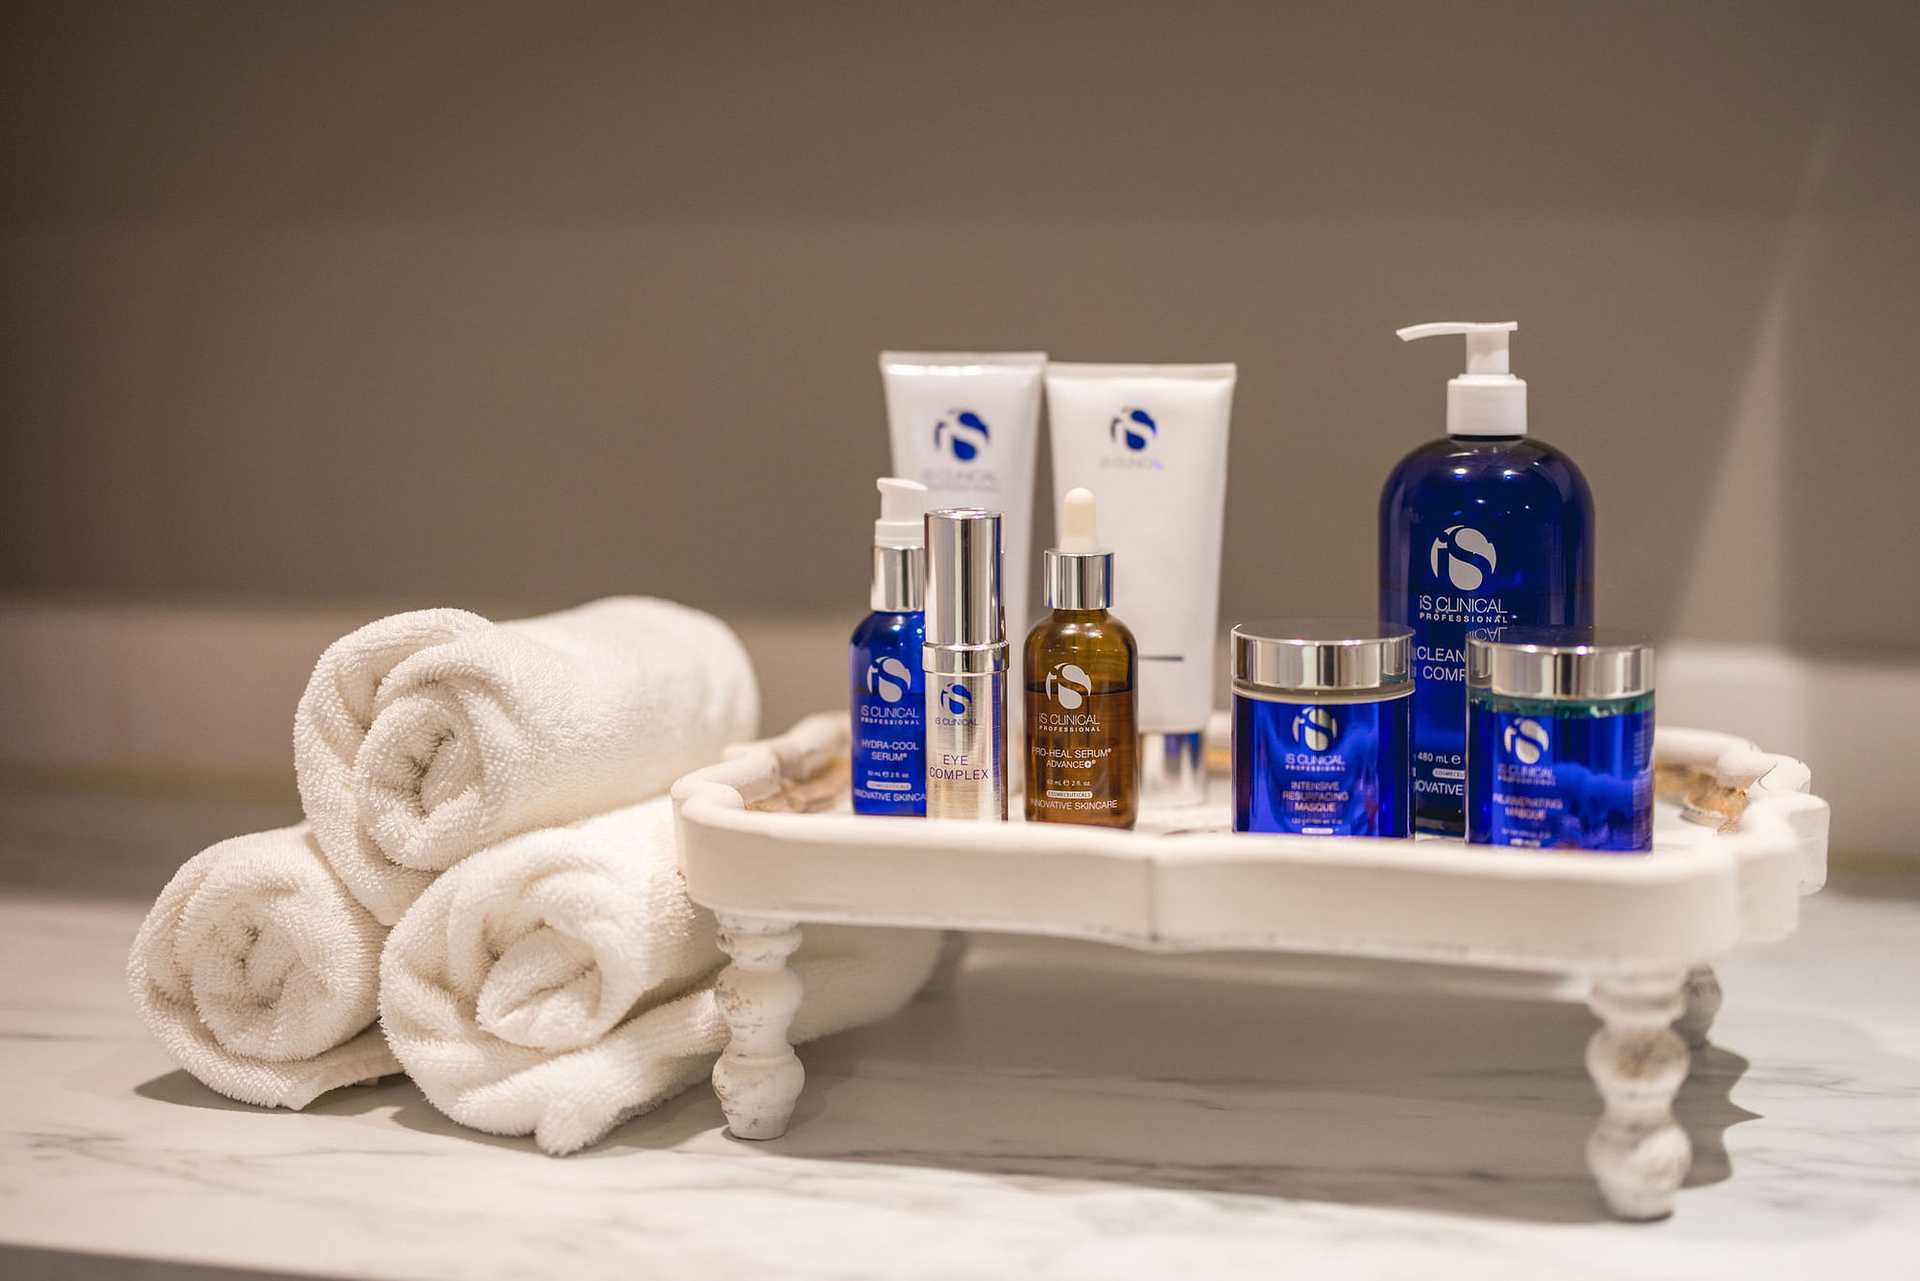 Skincare products and towels arranged neatly on a white tray on a bathroom counter.